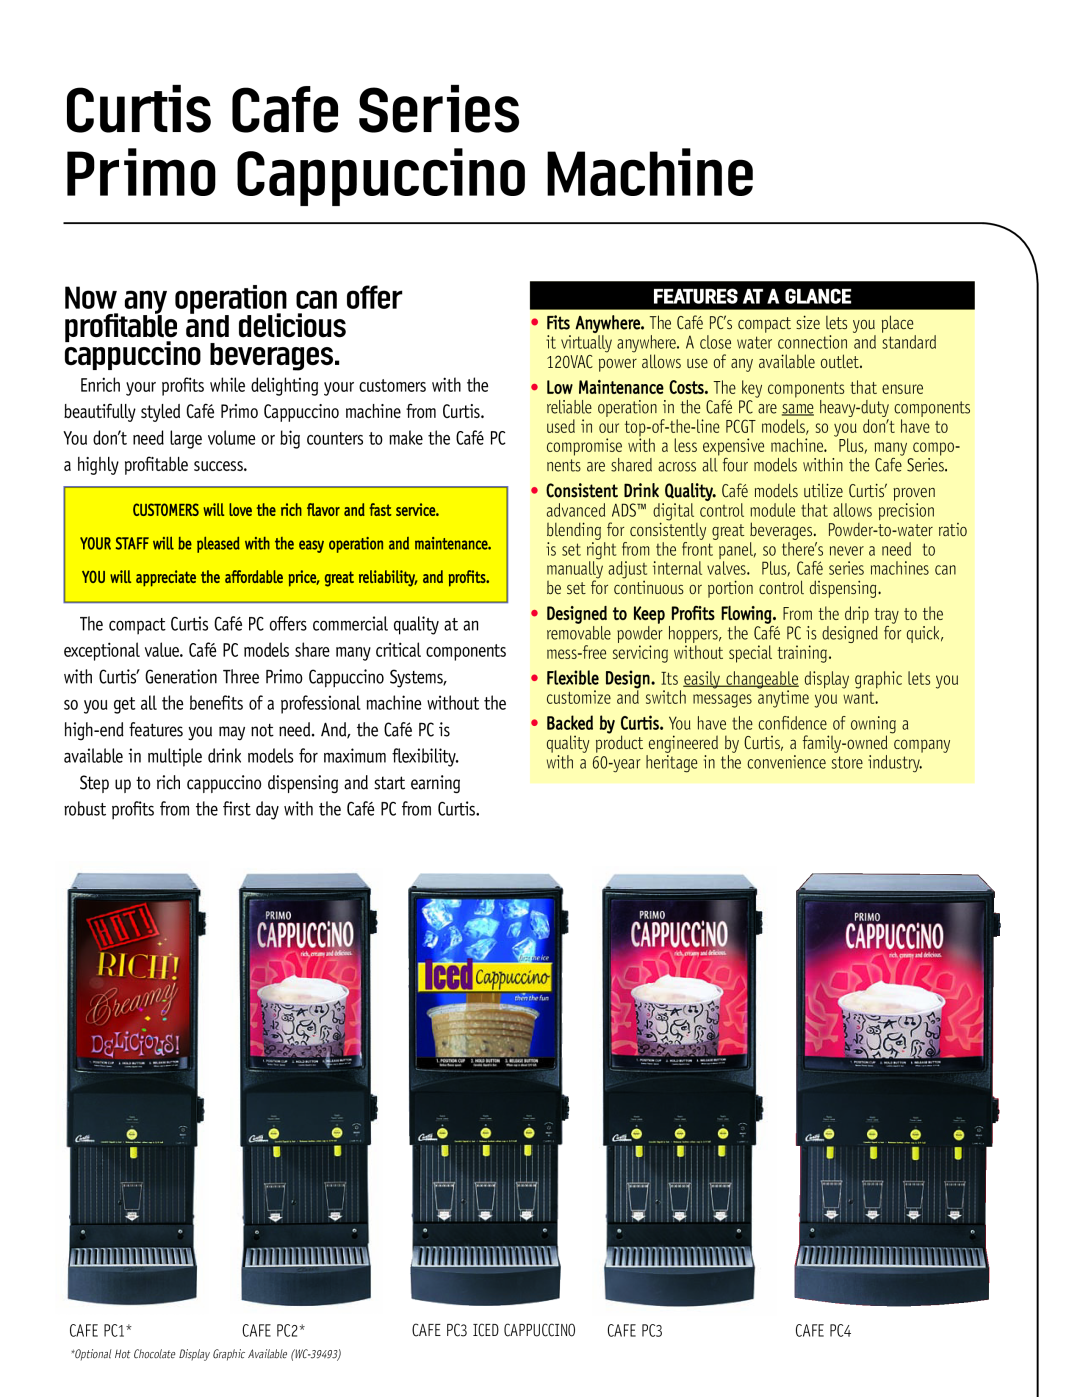 Curtis CAFE PC4, PC3 ICED CAPPUCCINO, PC2, PC1, CAFE PC3 Curtis Cafe Series Primo Cappuccino Machine, Features At A Glance 